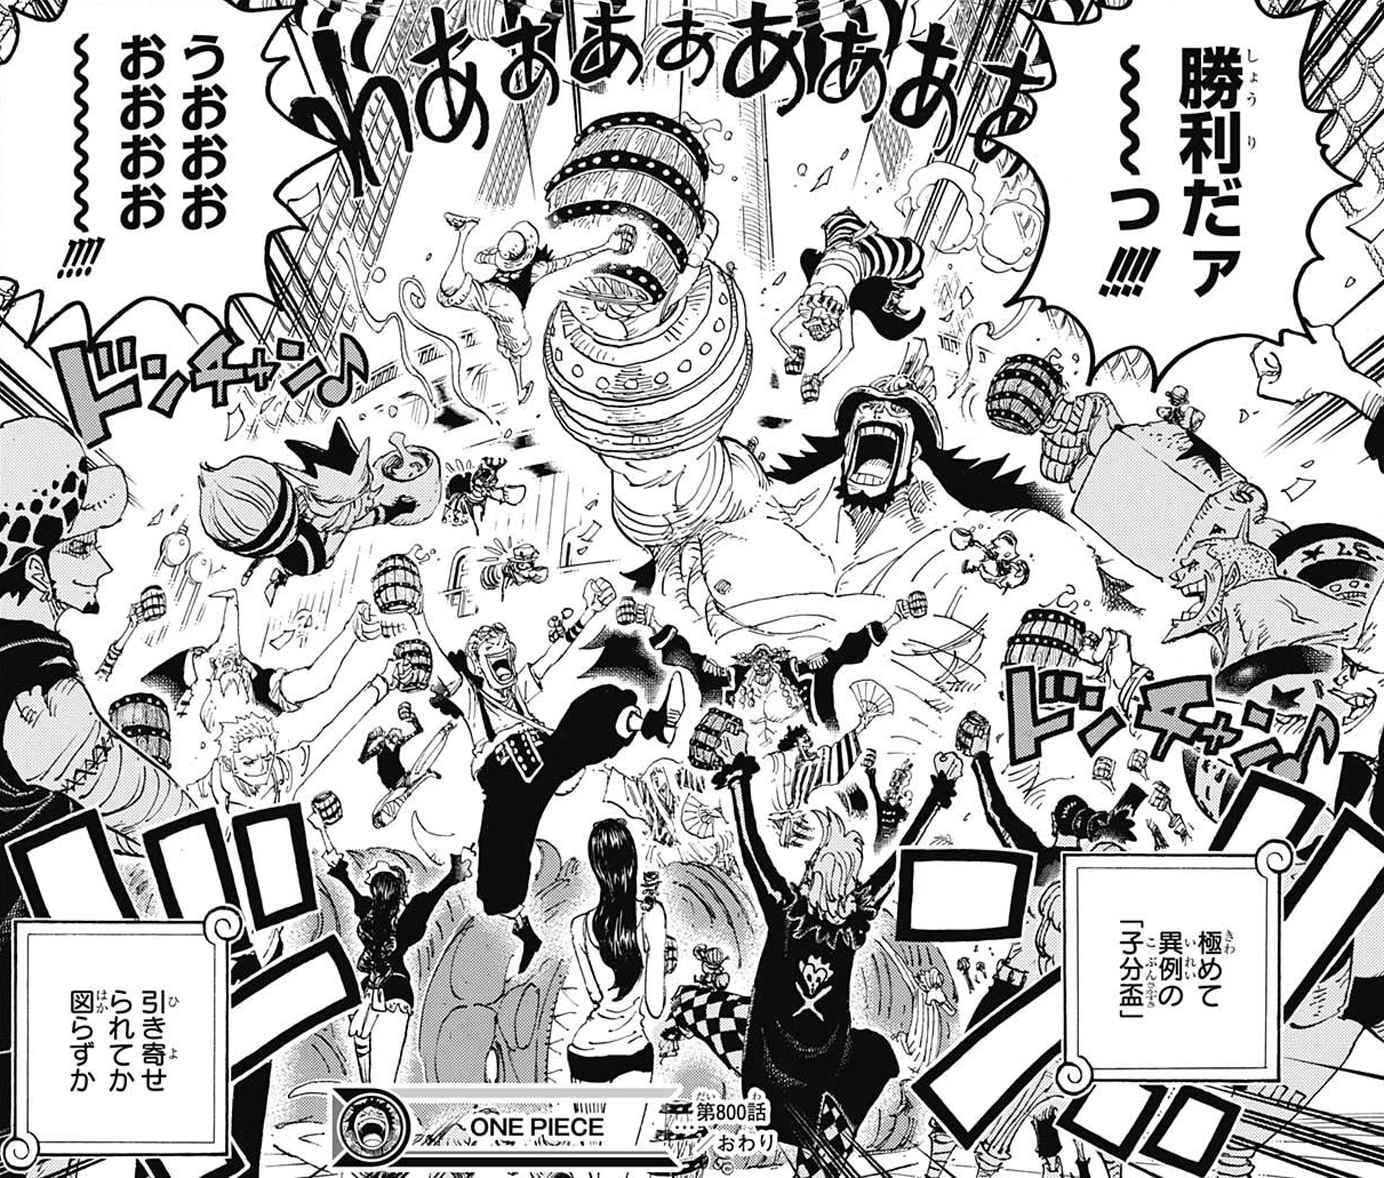 Straw Hat Luffy Grand Fleet – What will be the major incident?